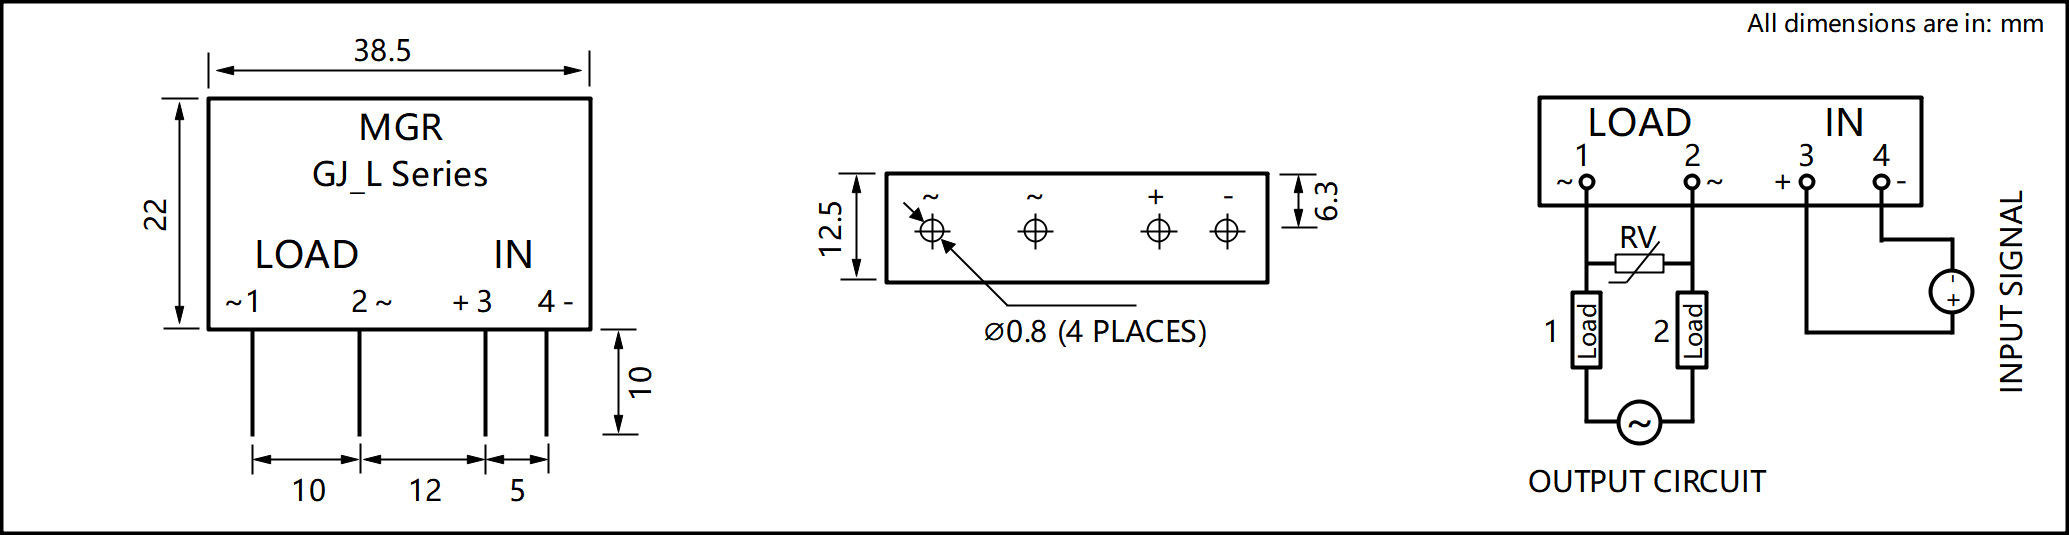 GJ_L Series PCB Mount Solid State Relay diagram